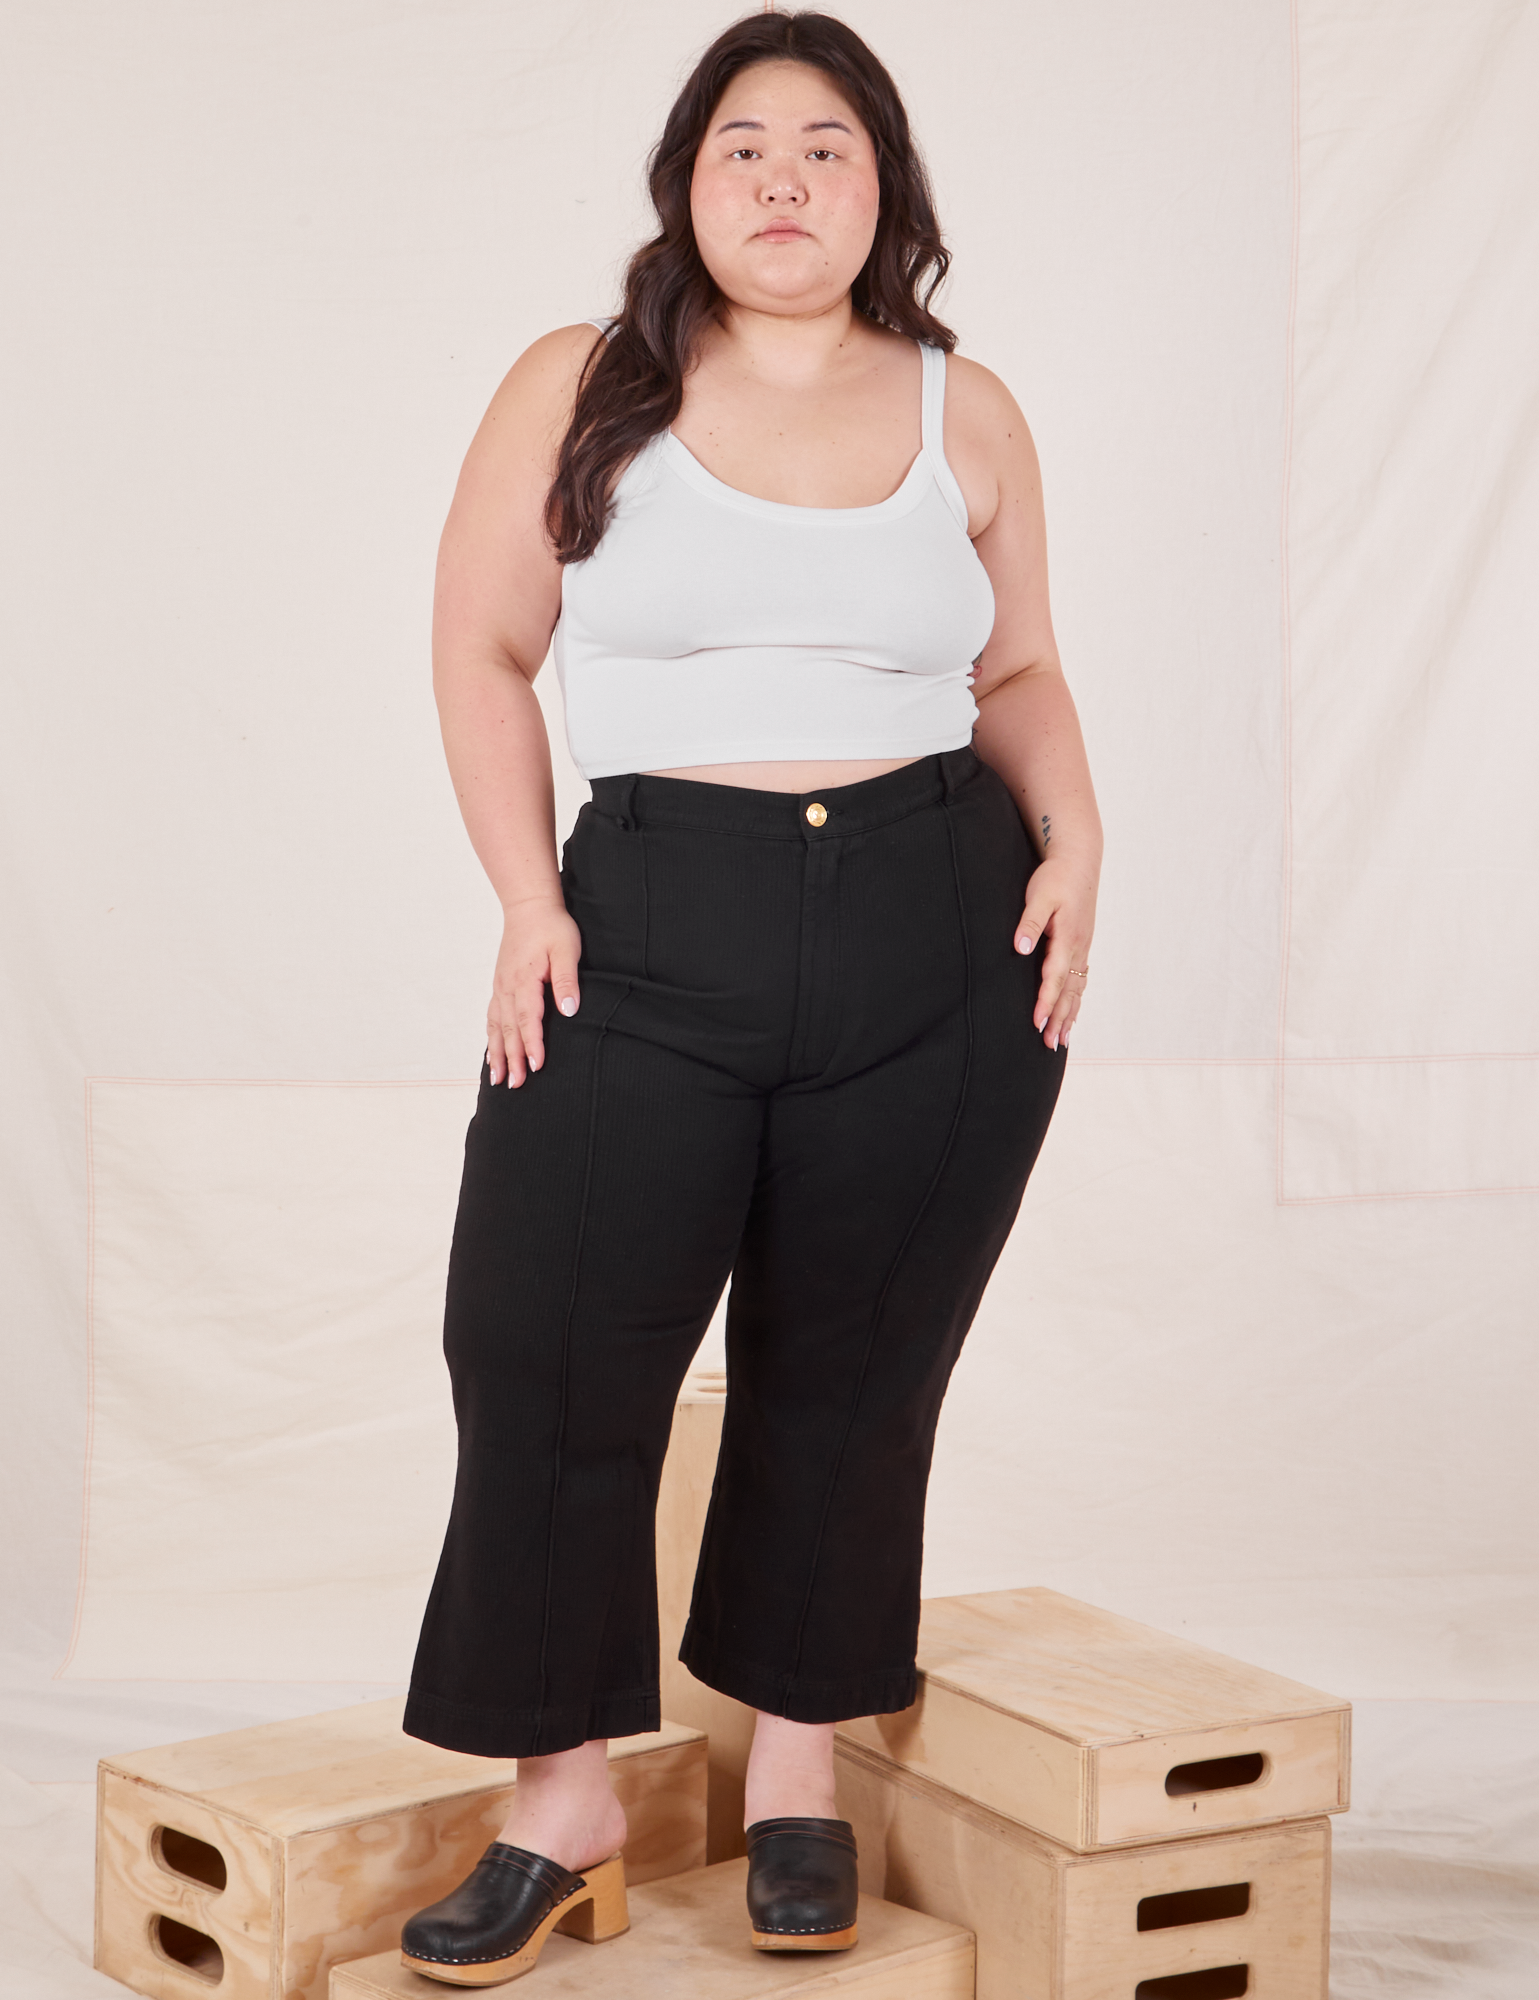 Ashley is 5&#39;7&quot; and wearing 1XL Petite Heritage Westerns in Basic Black paired with vintage off-white Cropped Cami